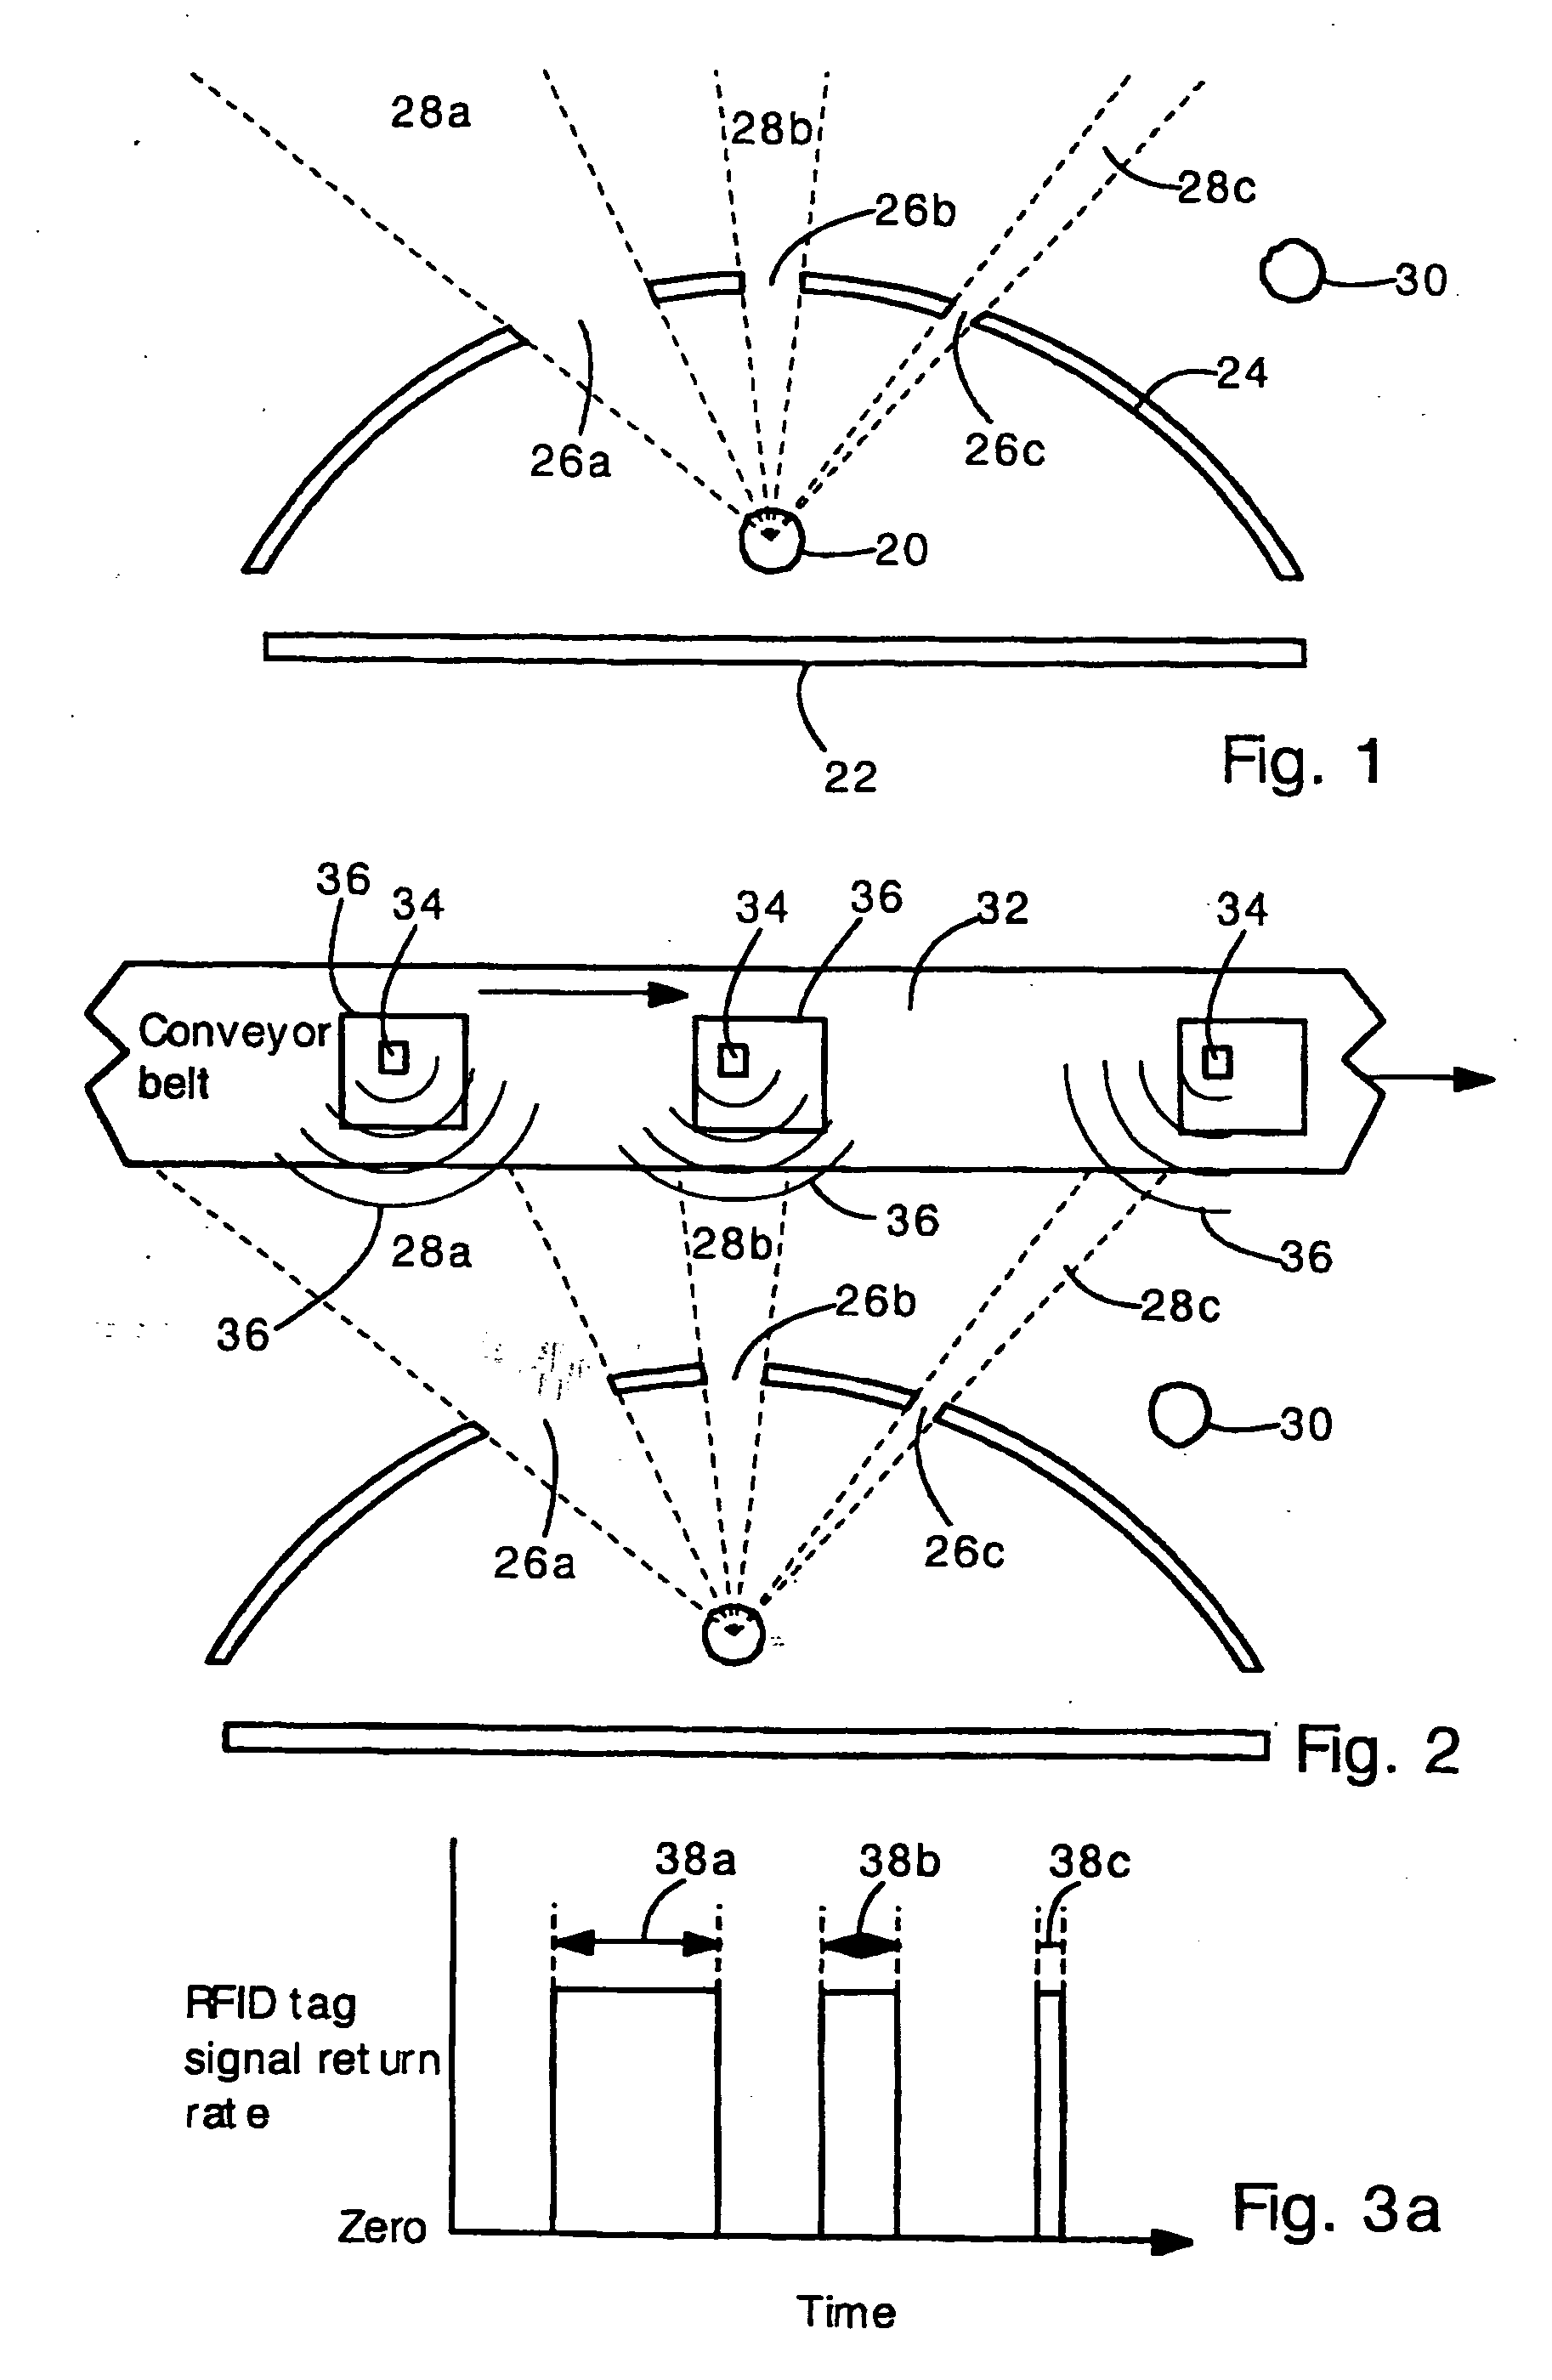 RFID reader having antenna with directional attenuation panels for determining RFID tag location